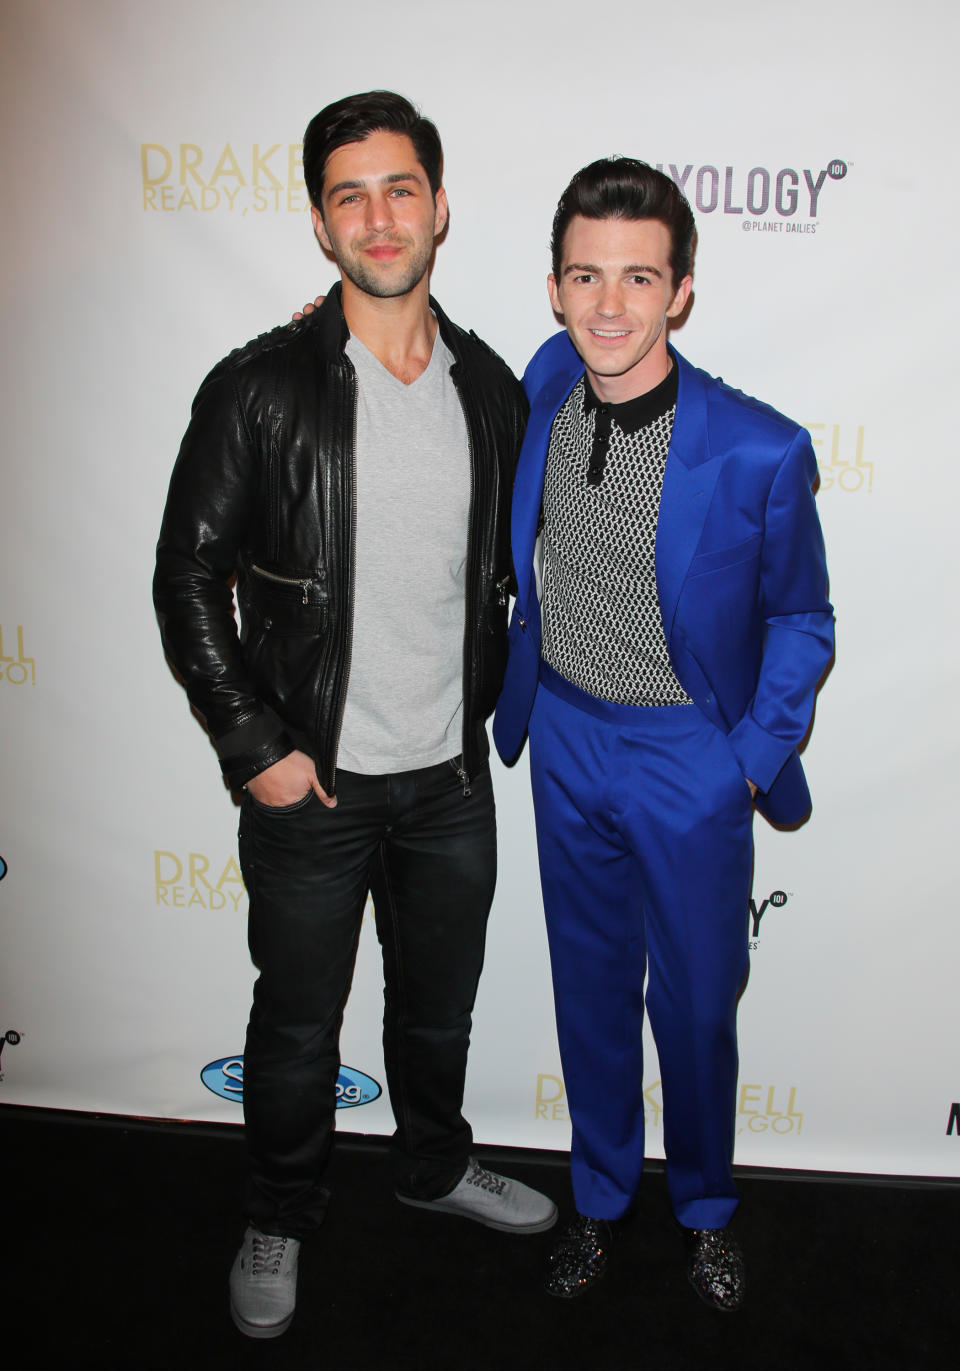 Is Brian Peck Related to Josh Peck? Find Out Relationship Amid Drake Bell’s Assault Claims